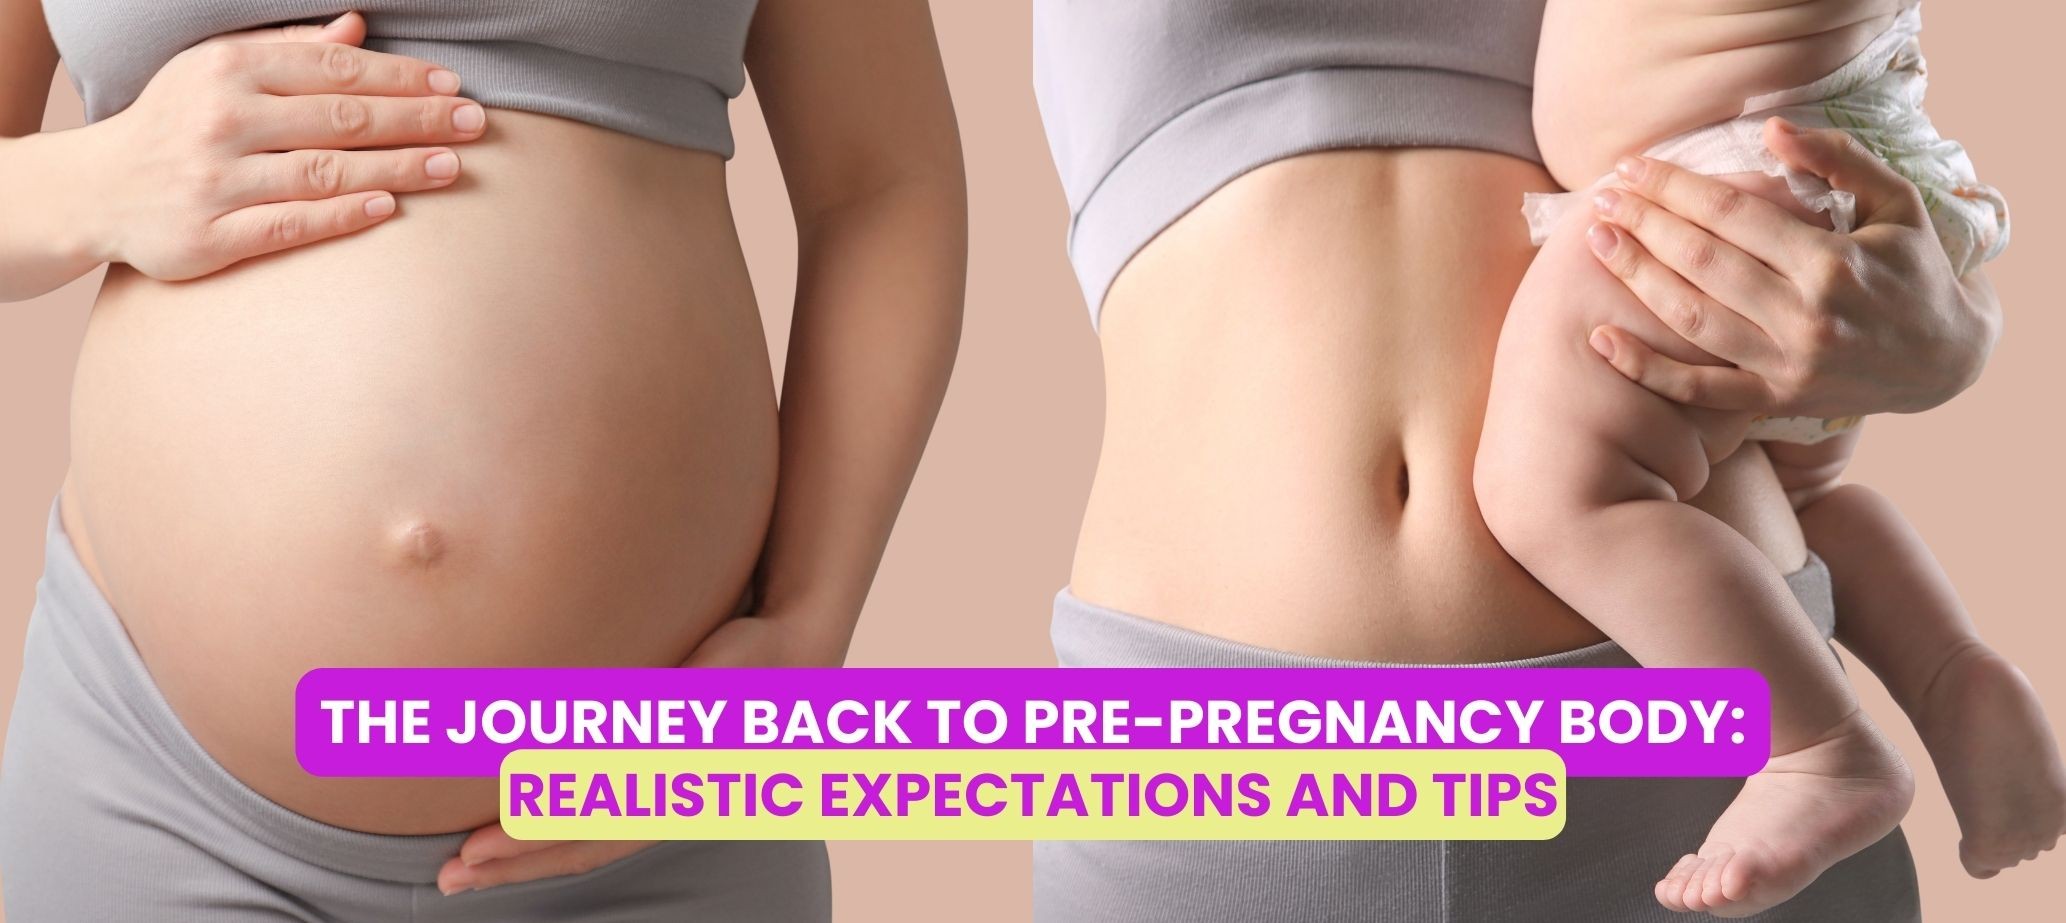 The Journey Back to Pre-Pregnancy Body: Realistic Expectations and Tips